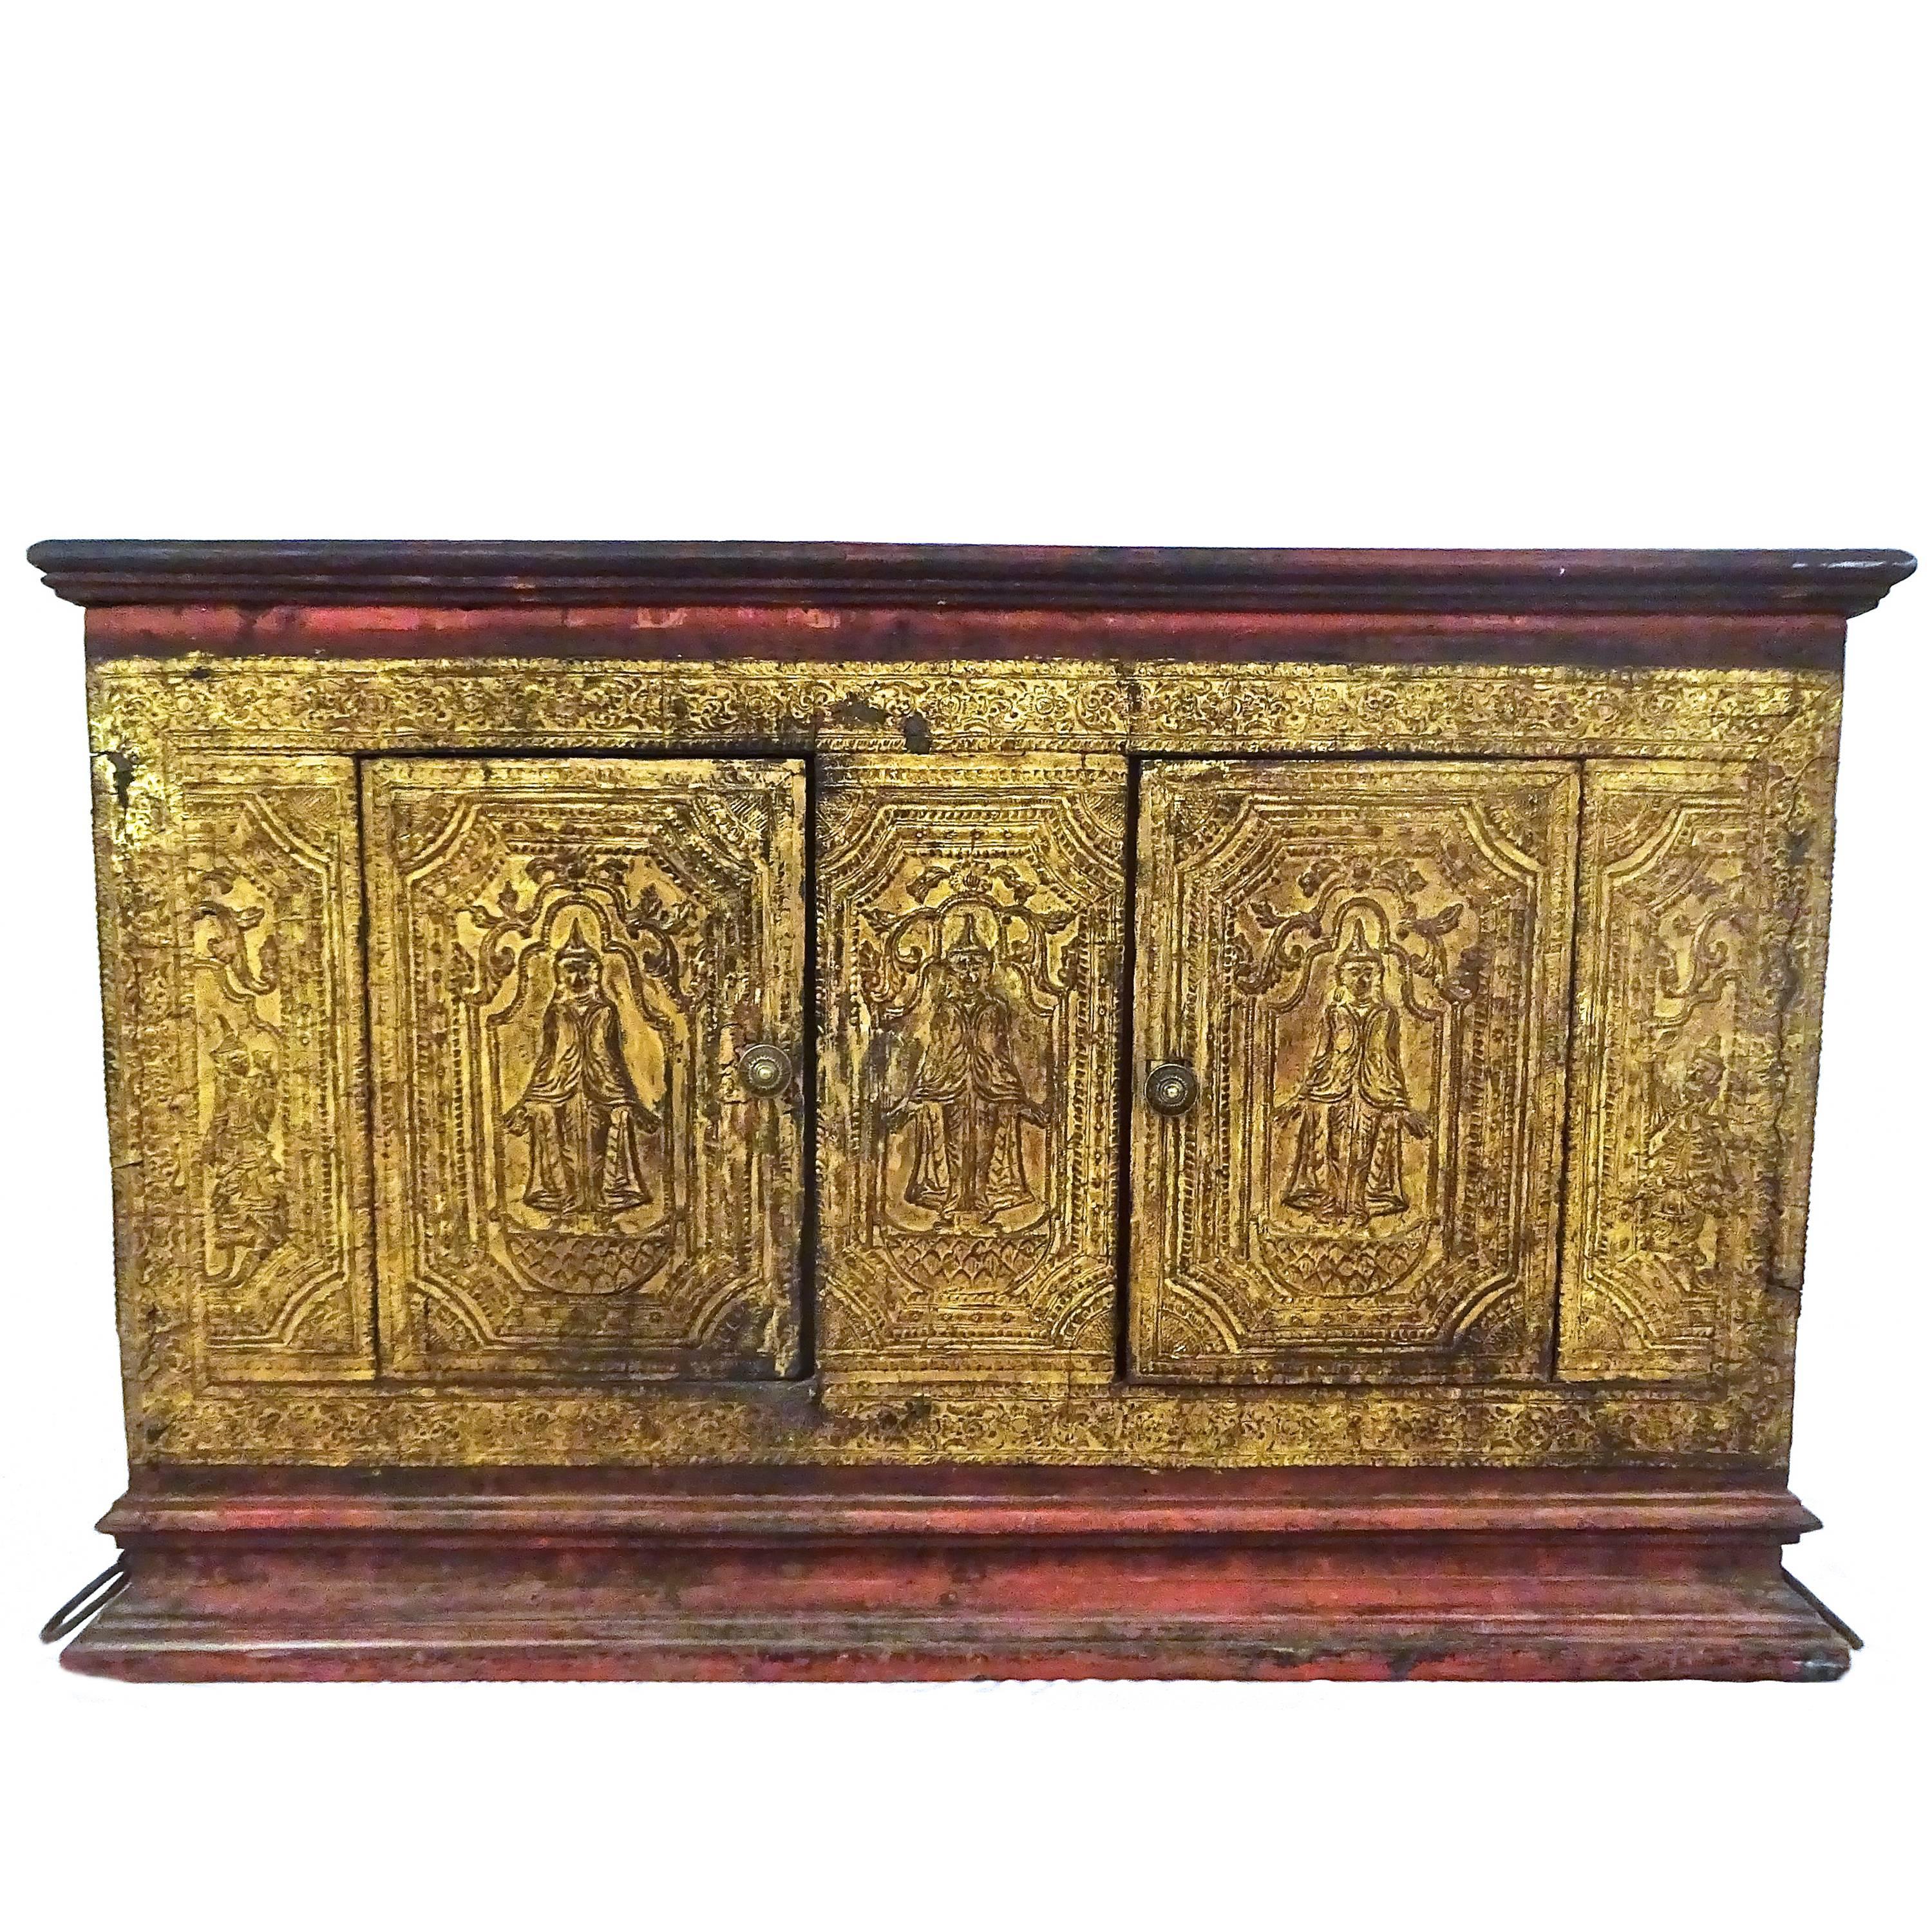 Stunning Large Late 19th Century Thai Parcel-Gilt and Painted Wedding Trunk